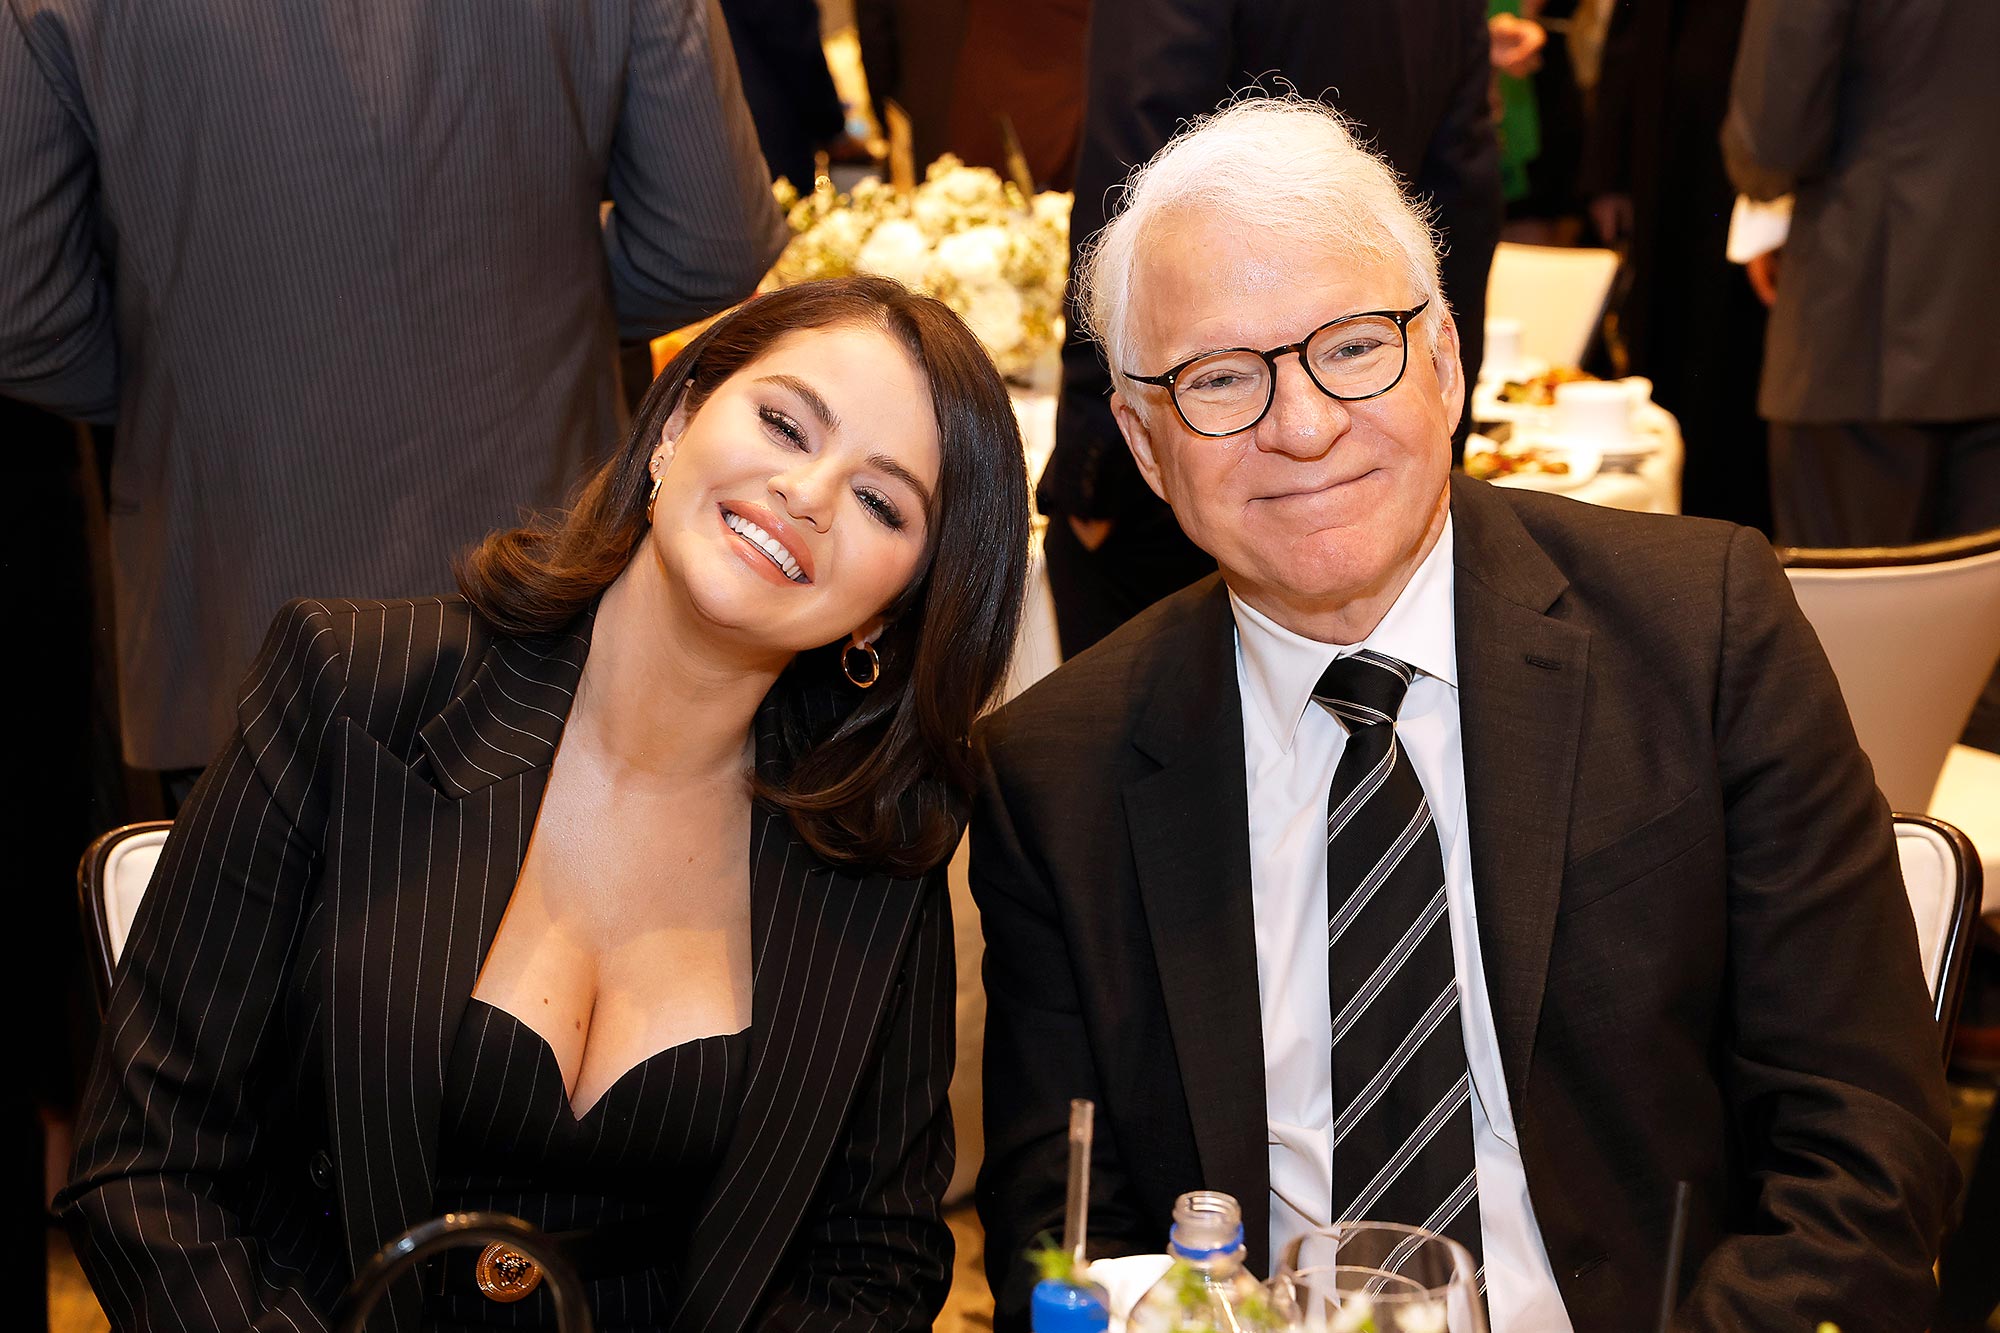 Selena Gomez Nearly Brings Steve Martin to Tears With Latest Surprise